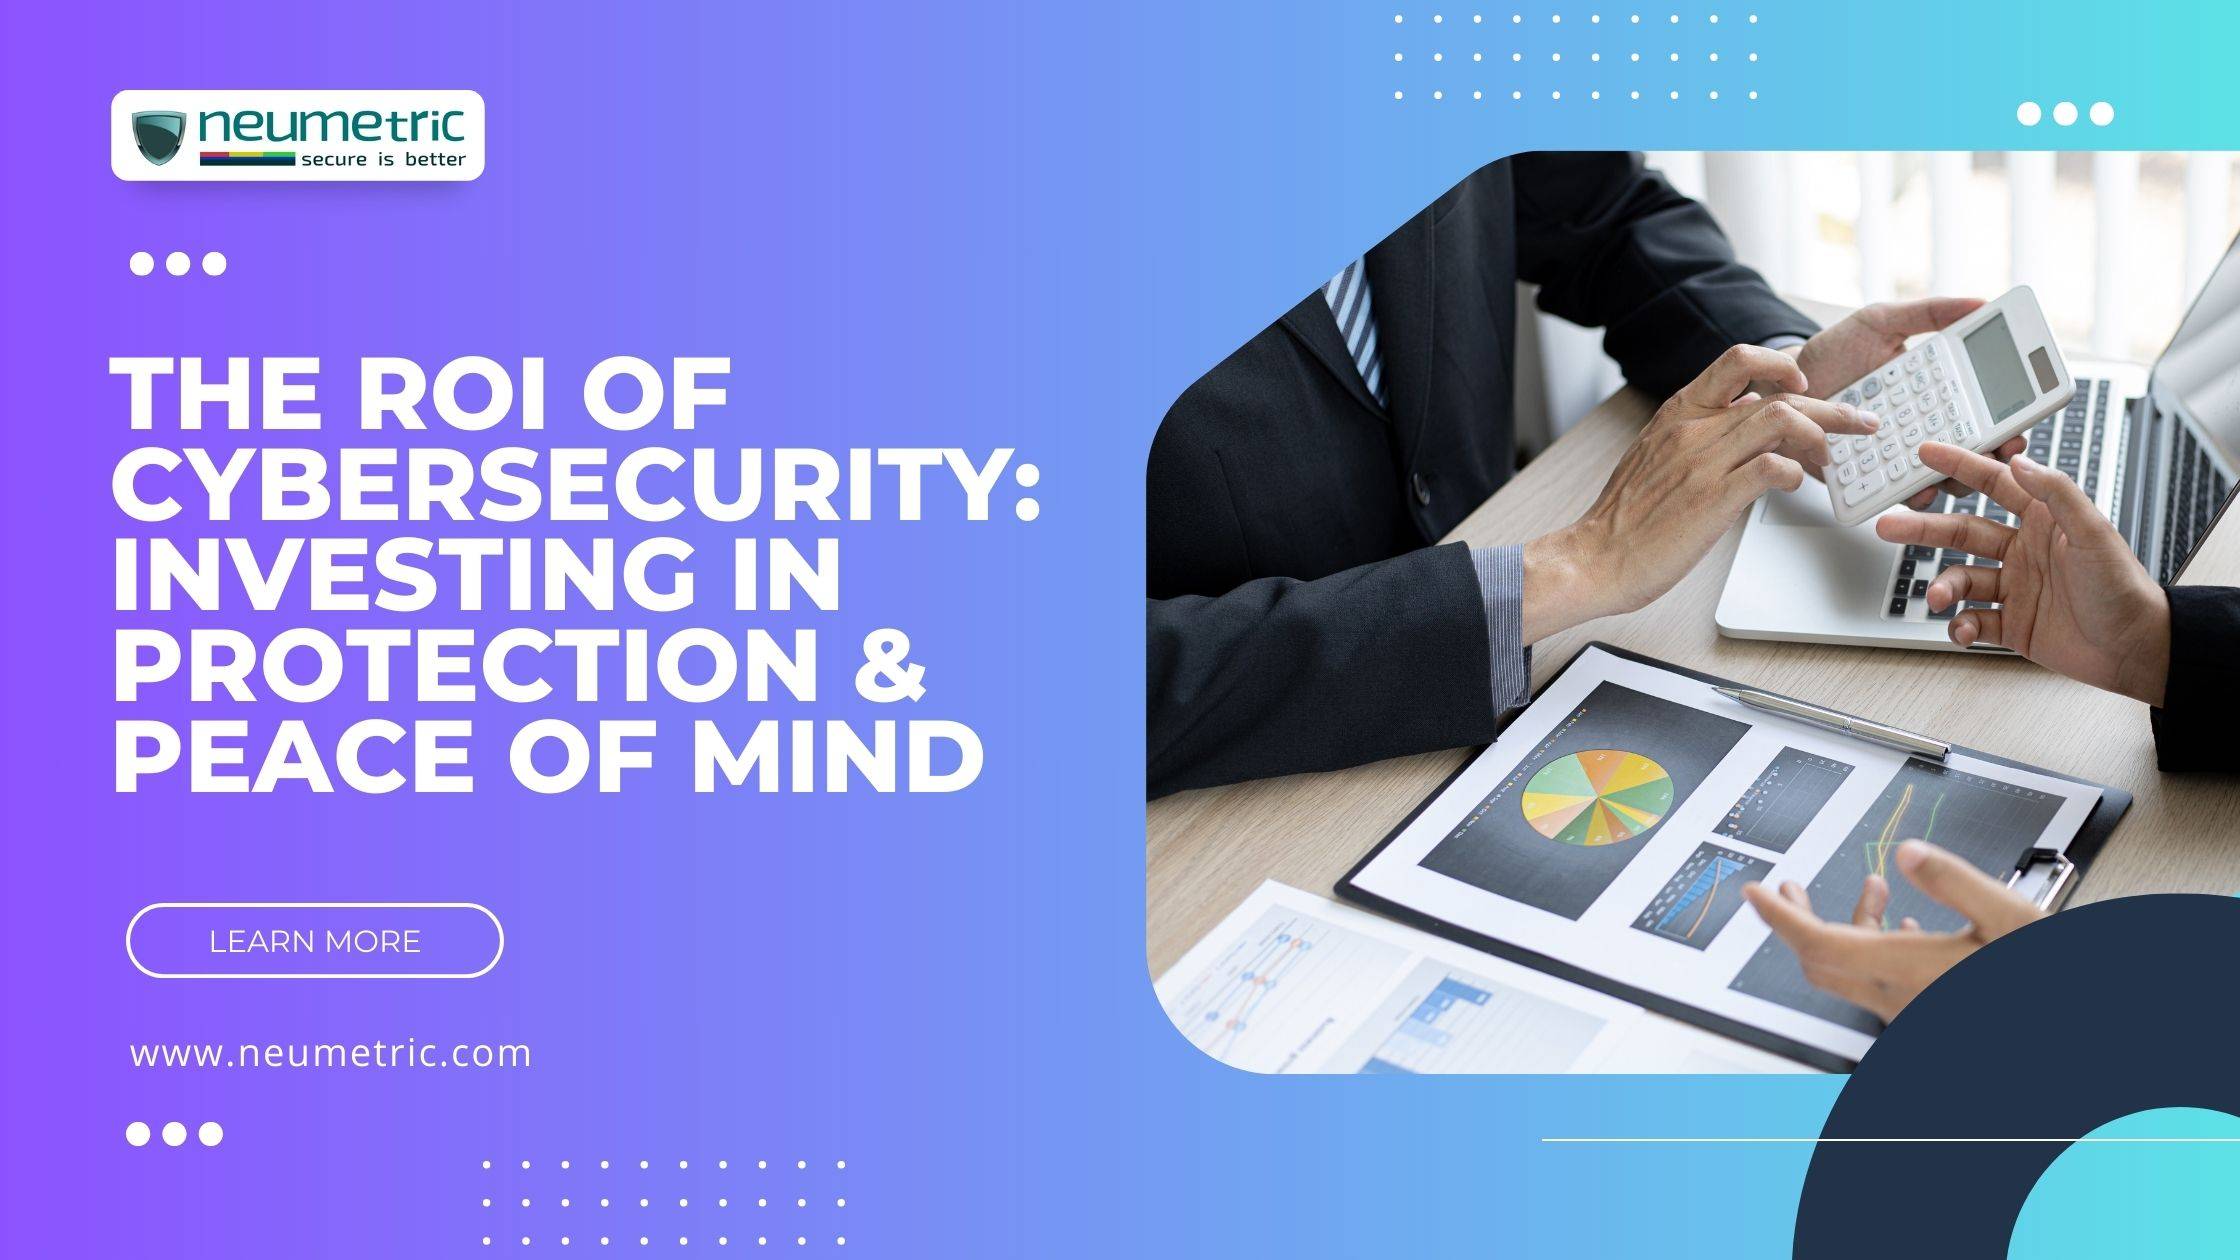 The ROI of Cybersecurity: Investing in Protection & Peace of Mind